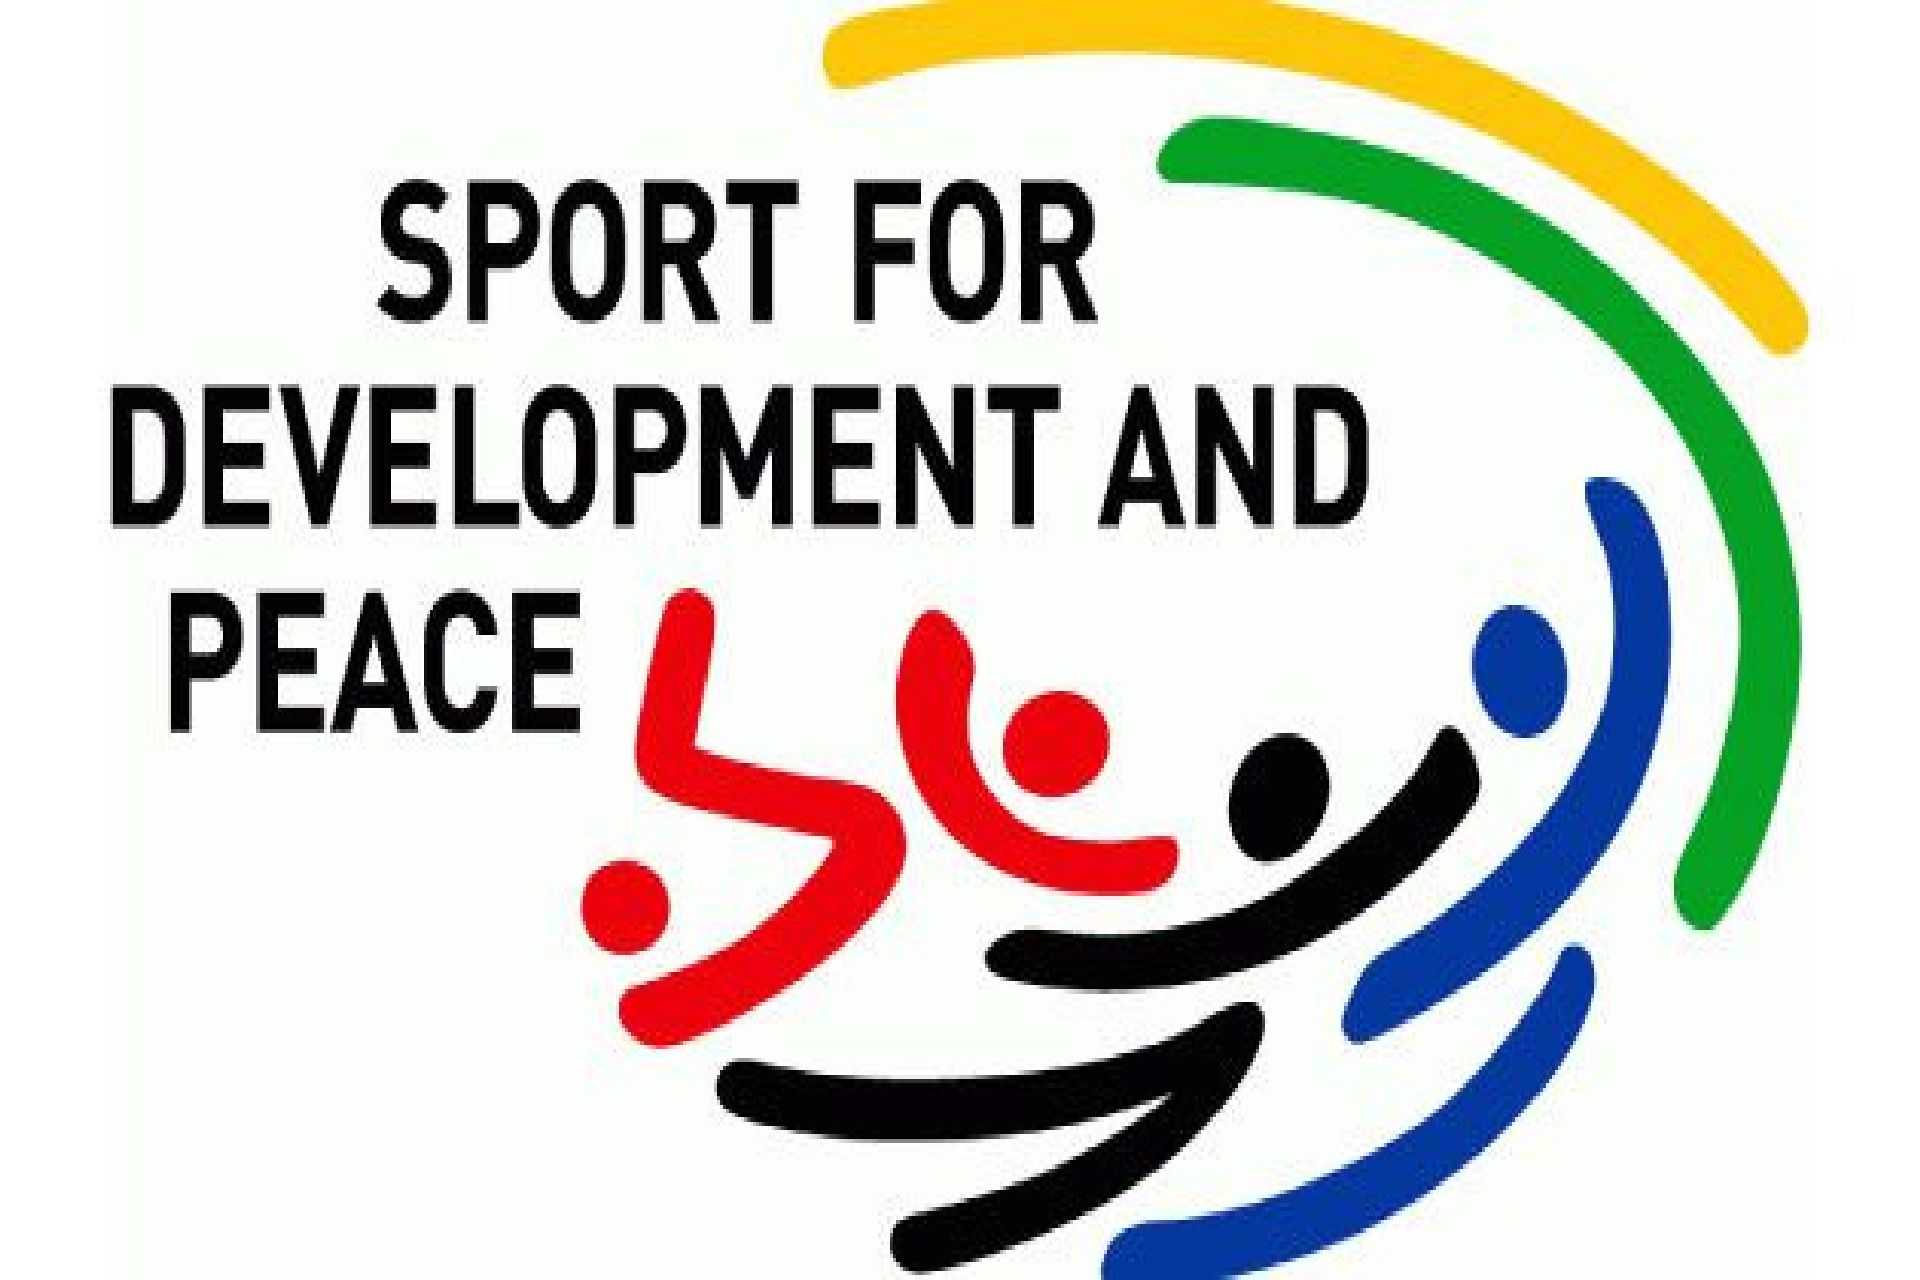 Celebrate International Day of Sport for Development and Peace with us